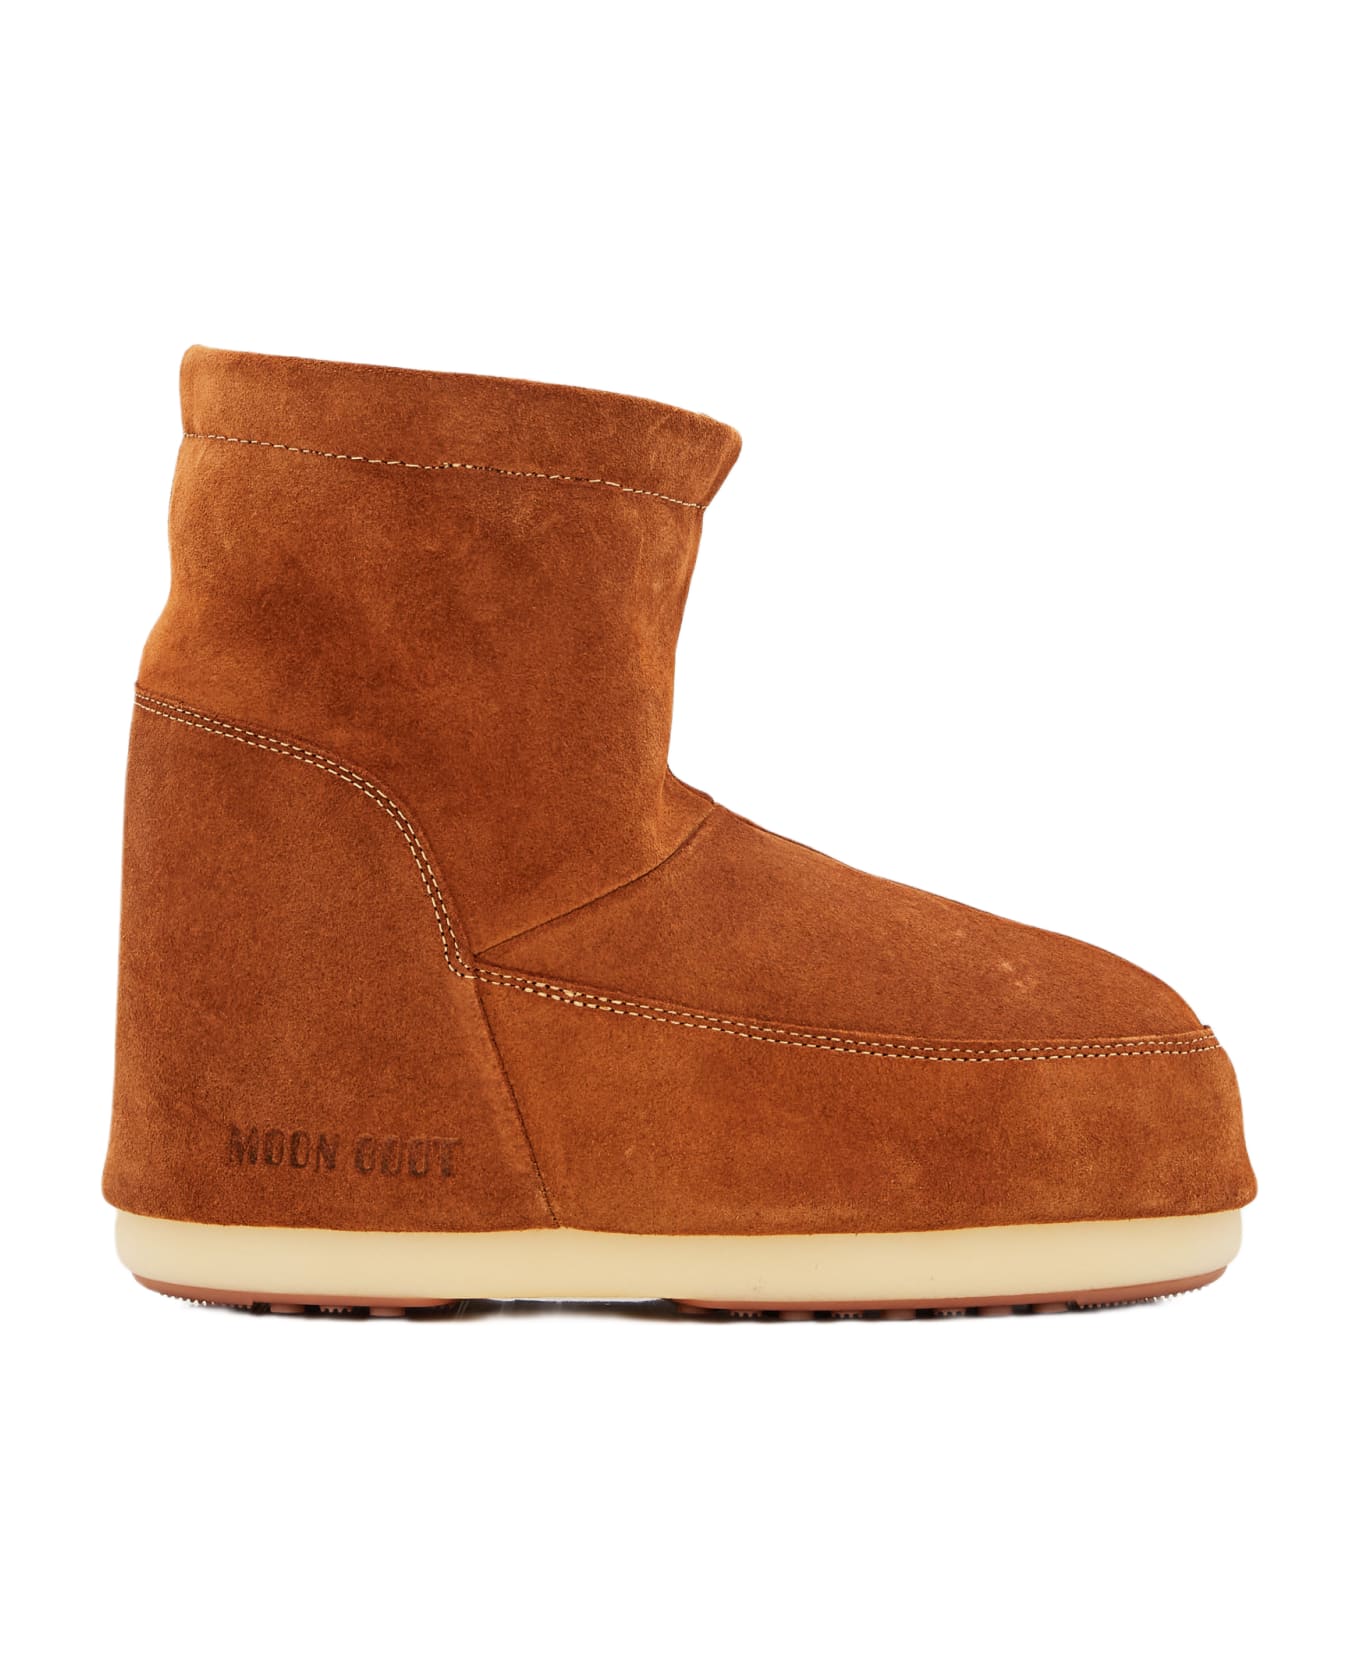 Moon Boot Mb Icon Low Nolace Suede Mid Boots - Brown